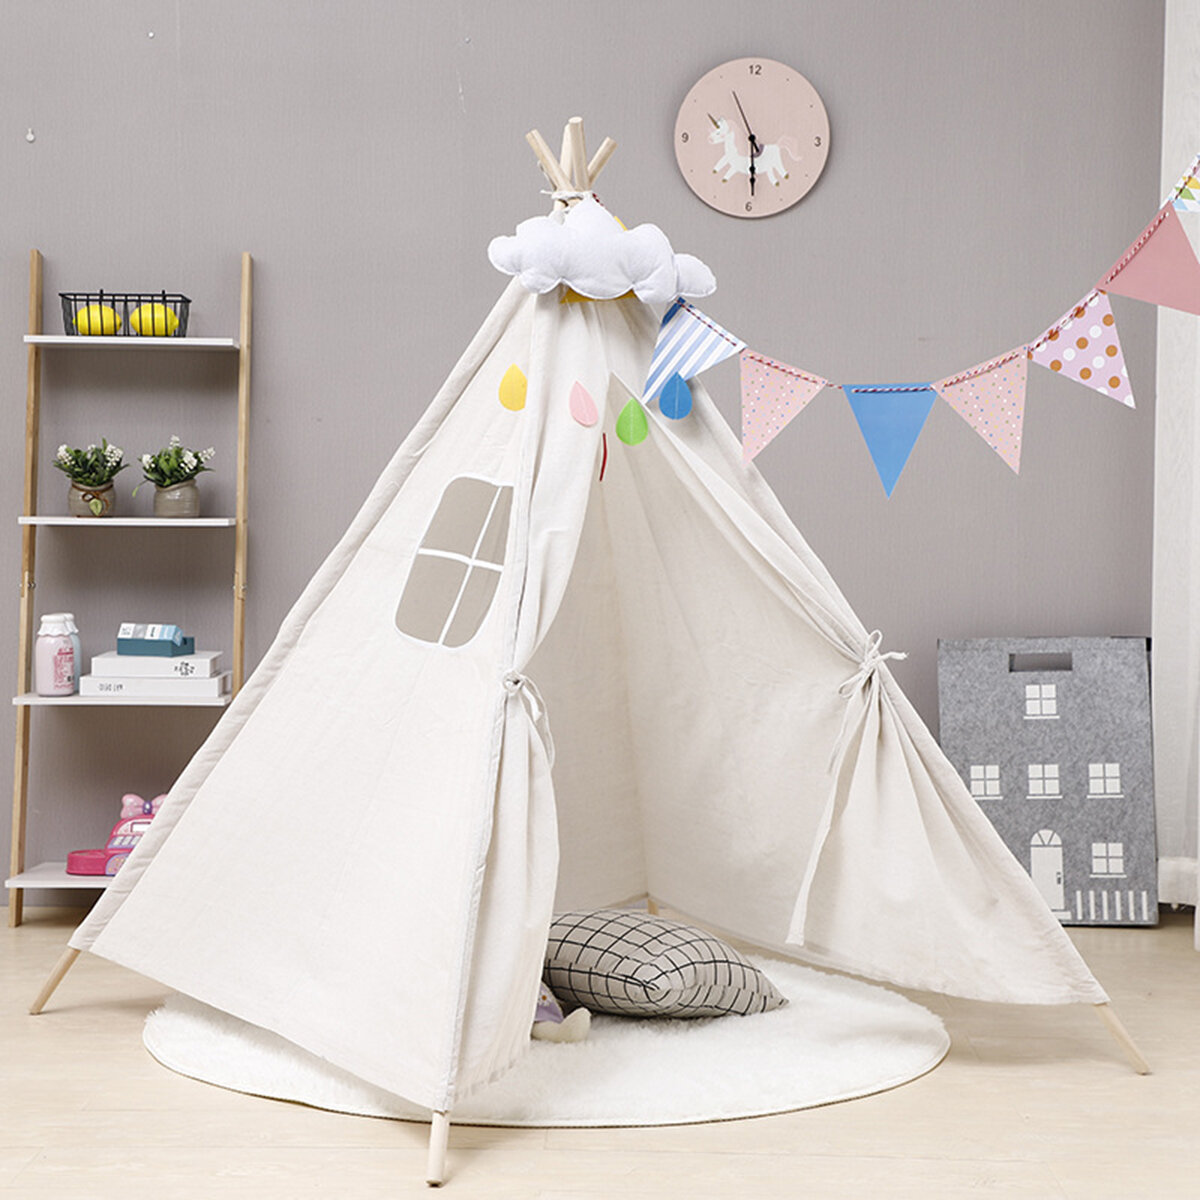 Image of 16M Large Teepee Tent Kids Cotton Canvas Pretend Play House Boy Girls Wigwam Gift